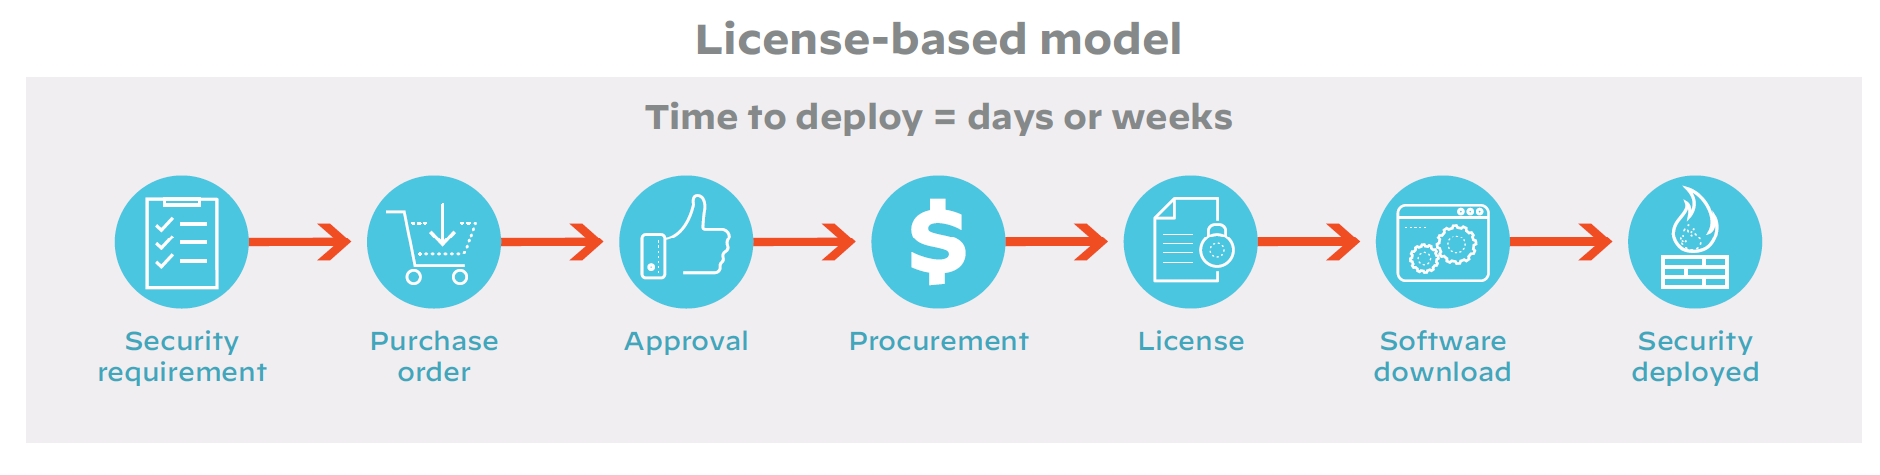 License-based model: Time to deploy = days or weeks; Security requirement leads to purchase order leads to approval leads to procurement leads to license leads to software download leads to security deployed. 